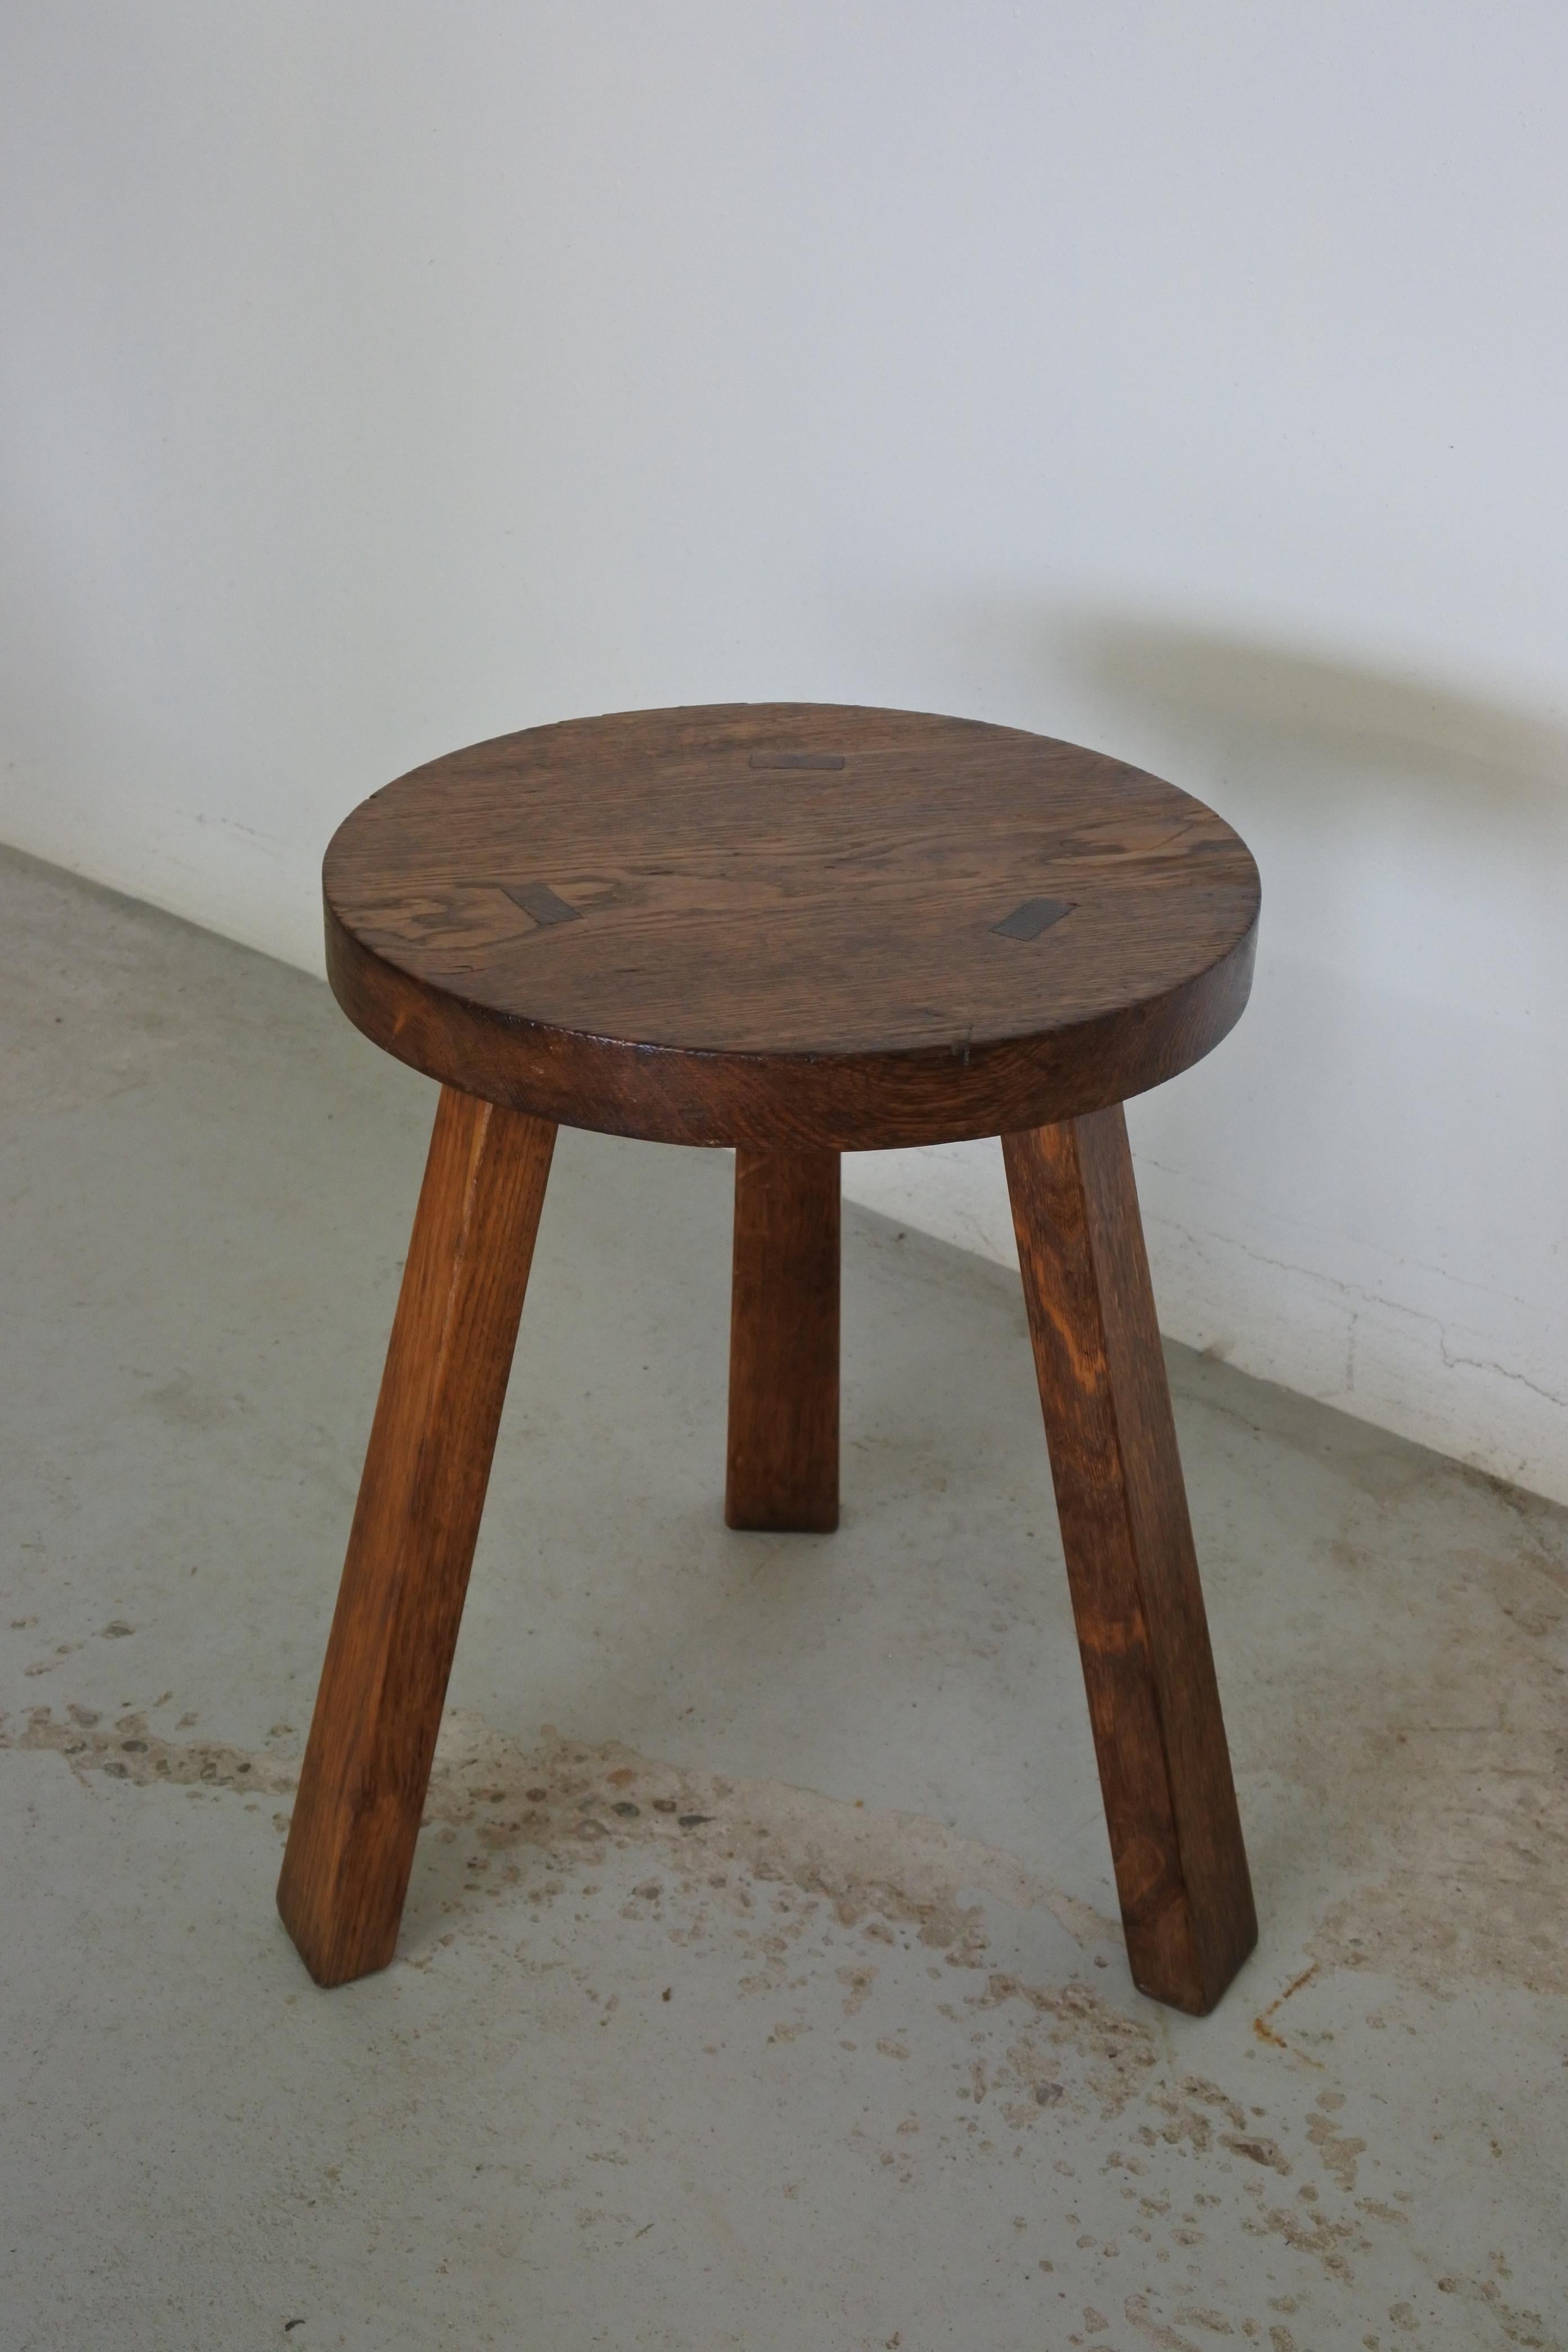 Mid-Century Modern tripod stool
Solid oak wood
Made in France in the 1950s.